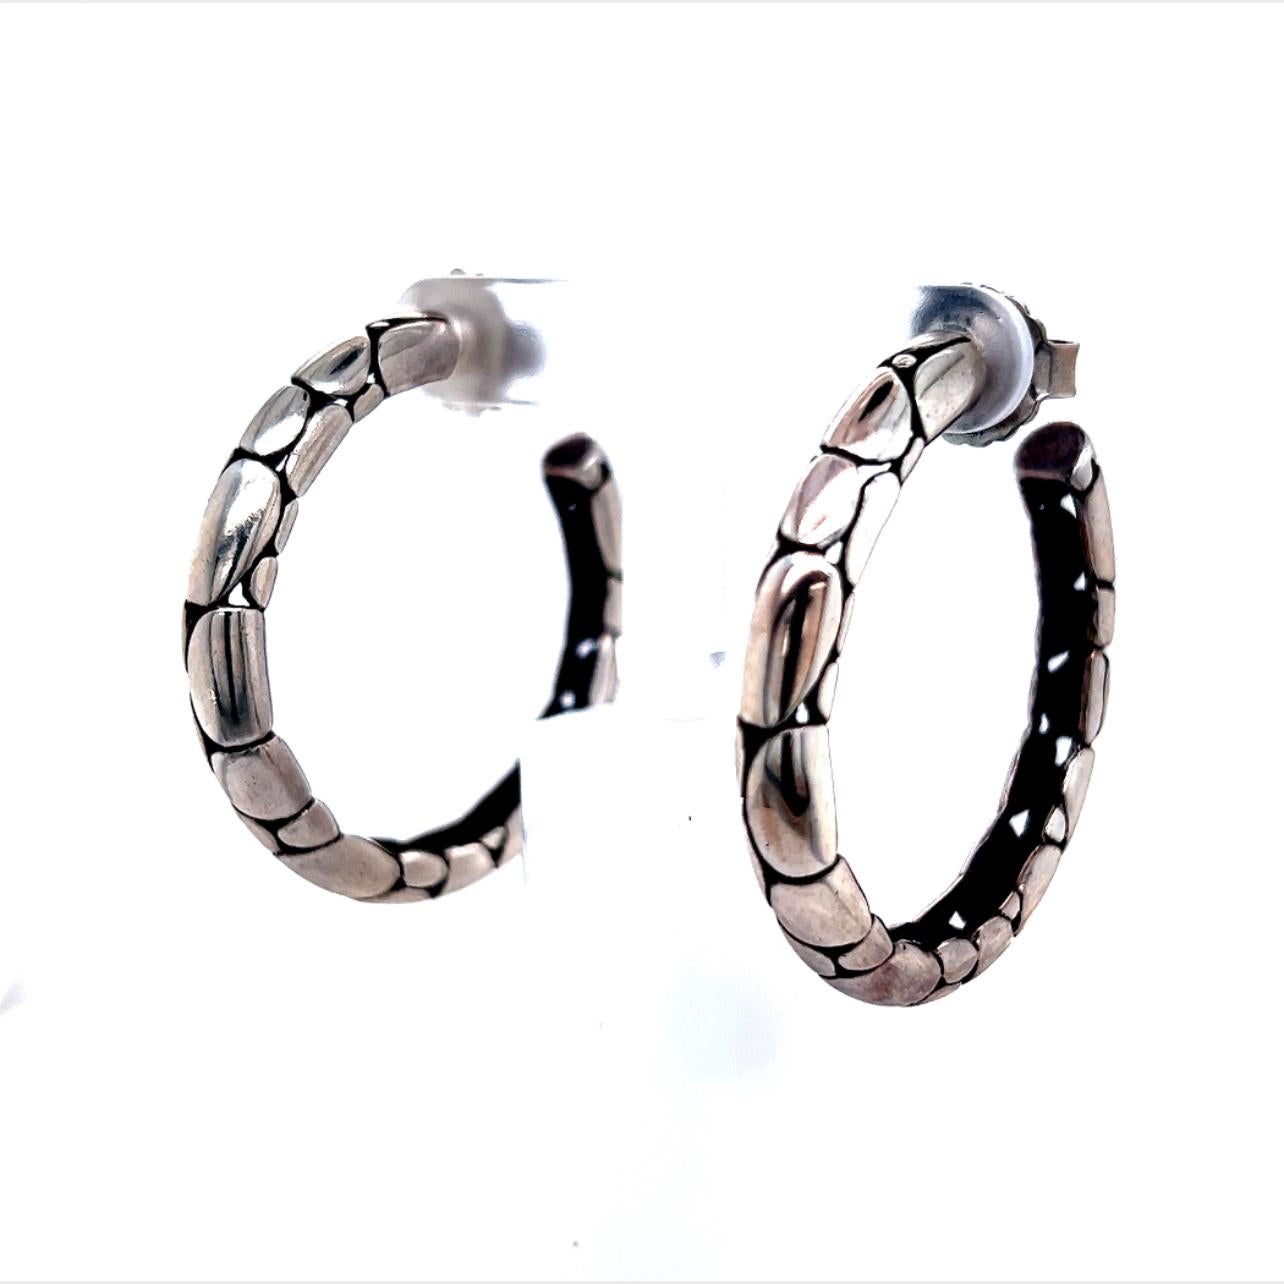 John Hardy Estate Pebble Hoop Earrings Sterling Silver JH21

TRUSTED SELLER SINCE 2002

PLEASE SEE OUR HUNDREDS OF POSITIVE FEEDBACKS FROM OUR CLIENTS!!

FREE SHIPPING!!

DETAILS
Style: Pebble
Earrings: Hoop
Drop: 1.5 Inches
Weight: 14.9